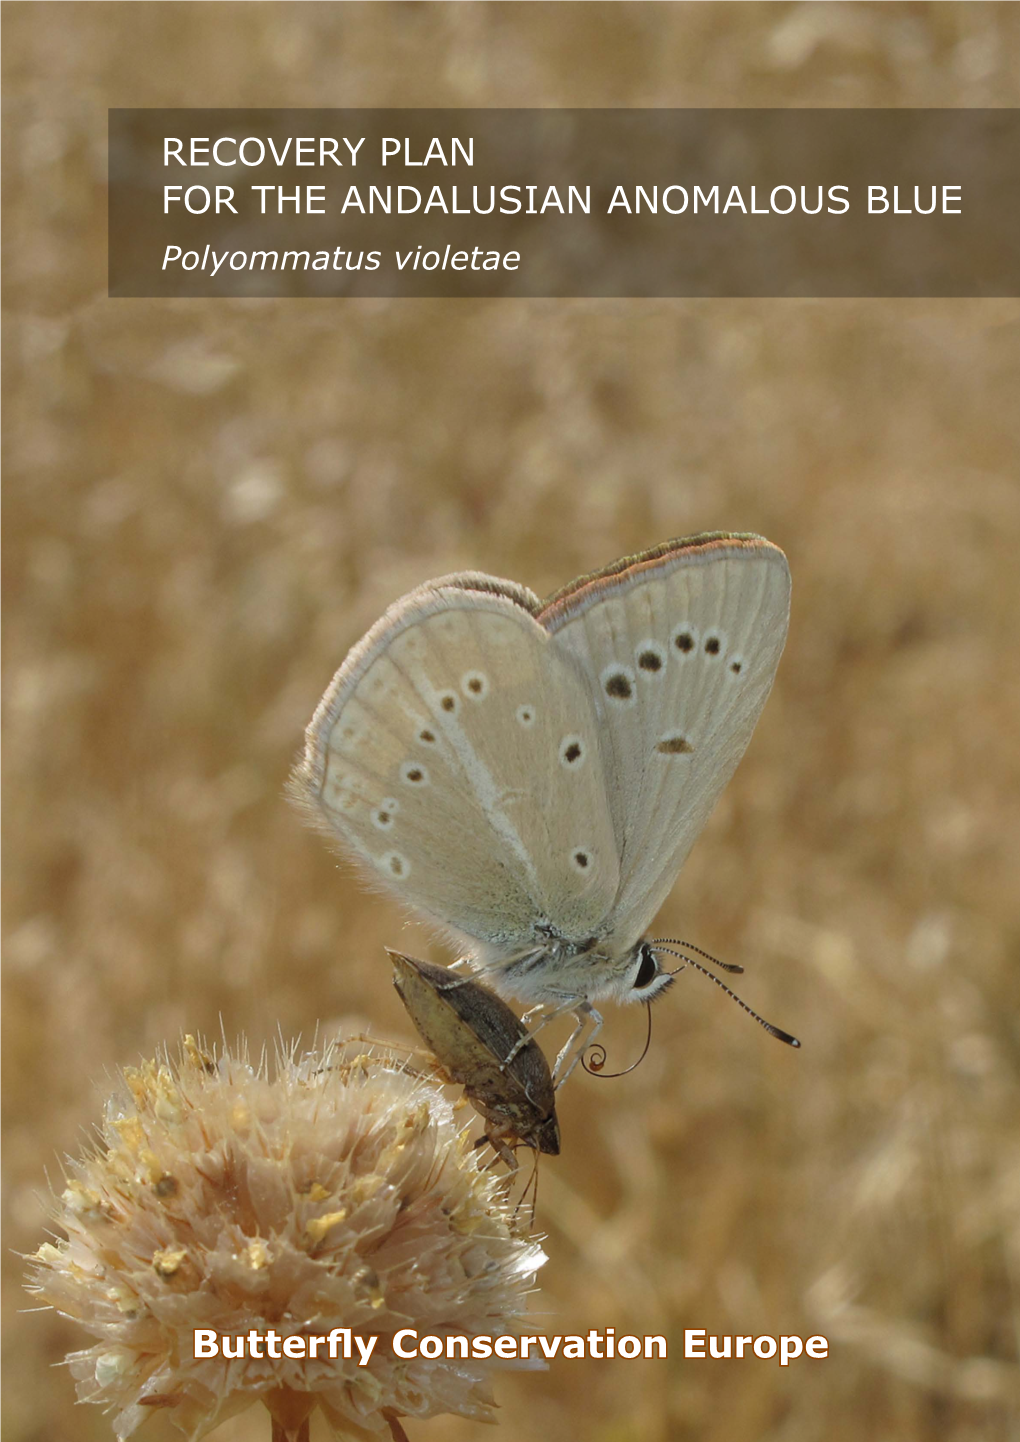 RECOVERY PLAN for the ANDALUSIAN ANOMALOUS BLUE Polyommatus Violetae